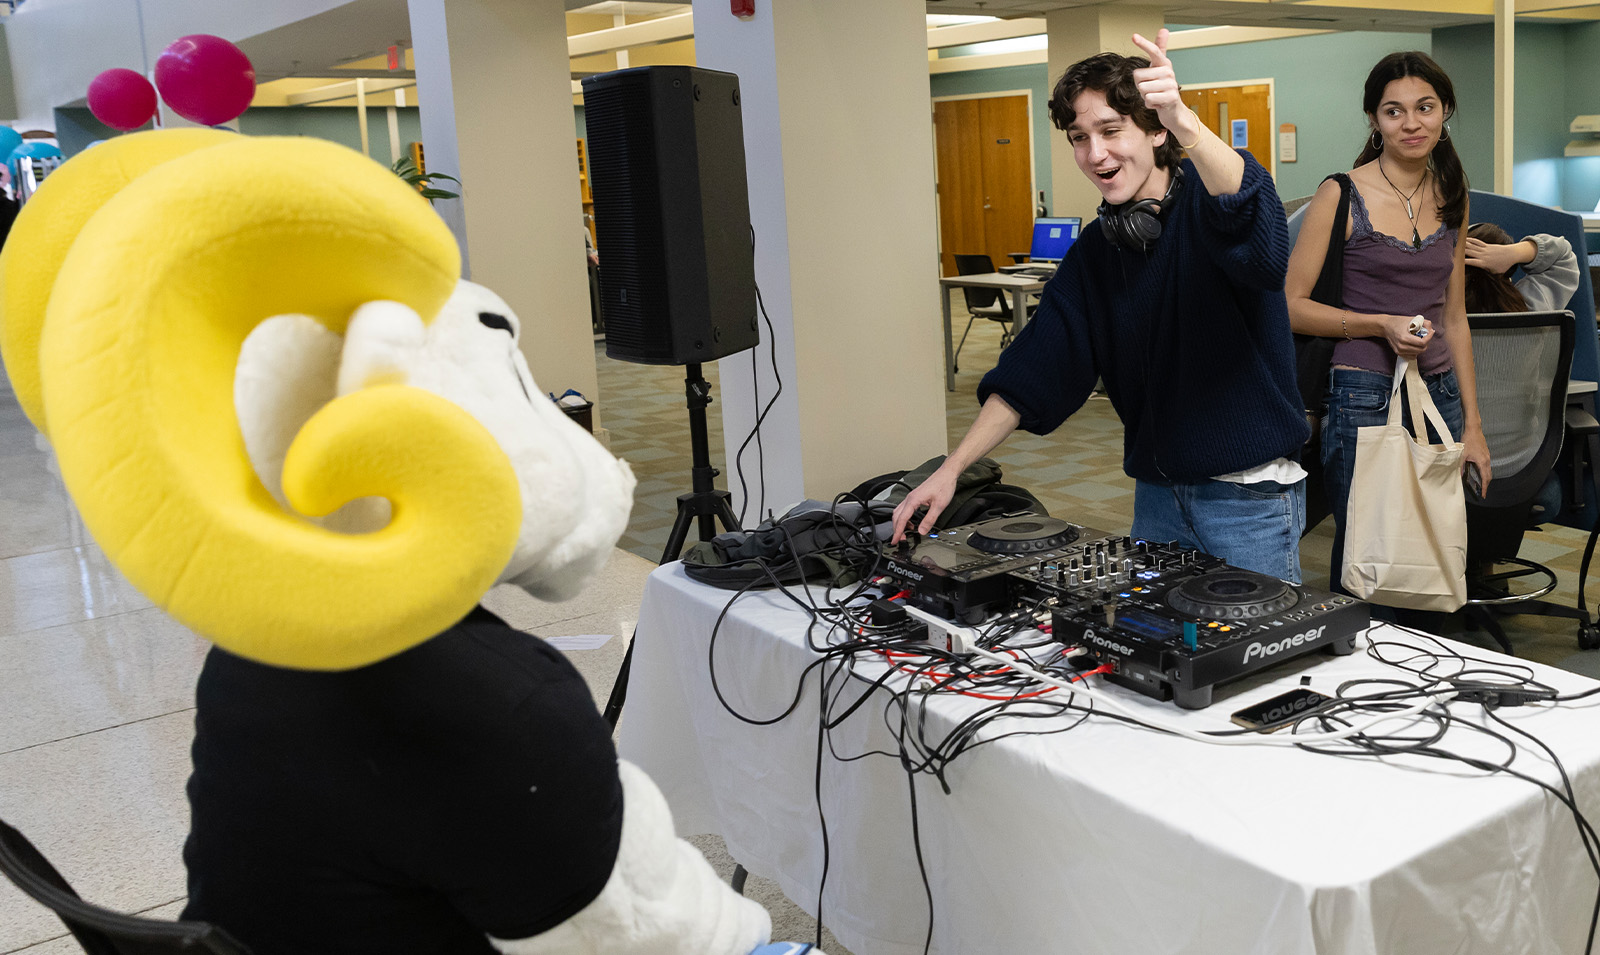 A ram mascot, Rameses, sitting attentively as a DJ plays music.